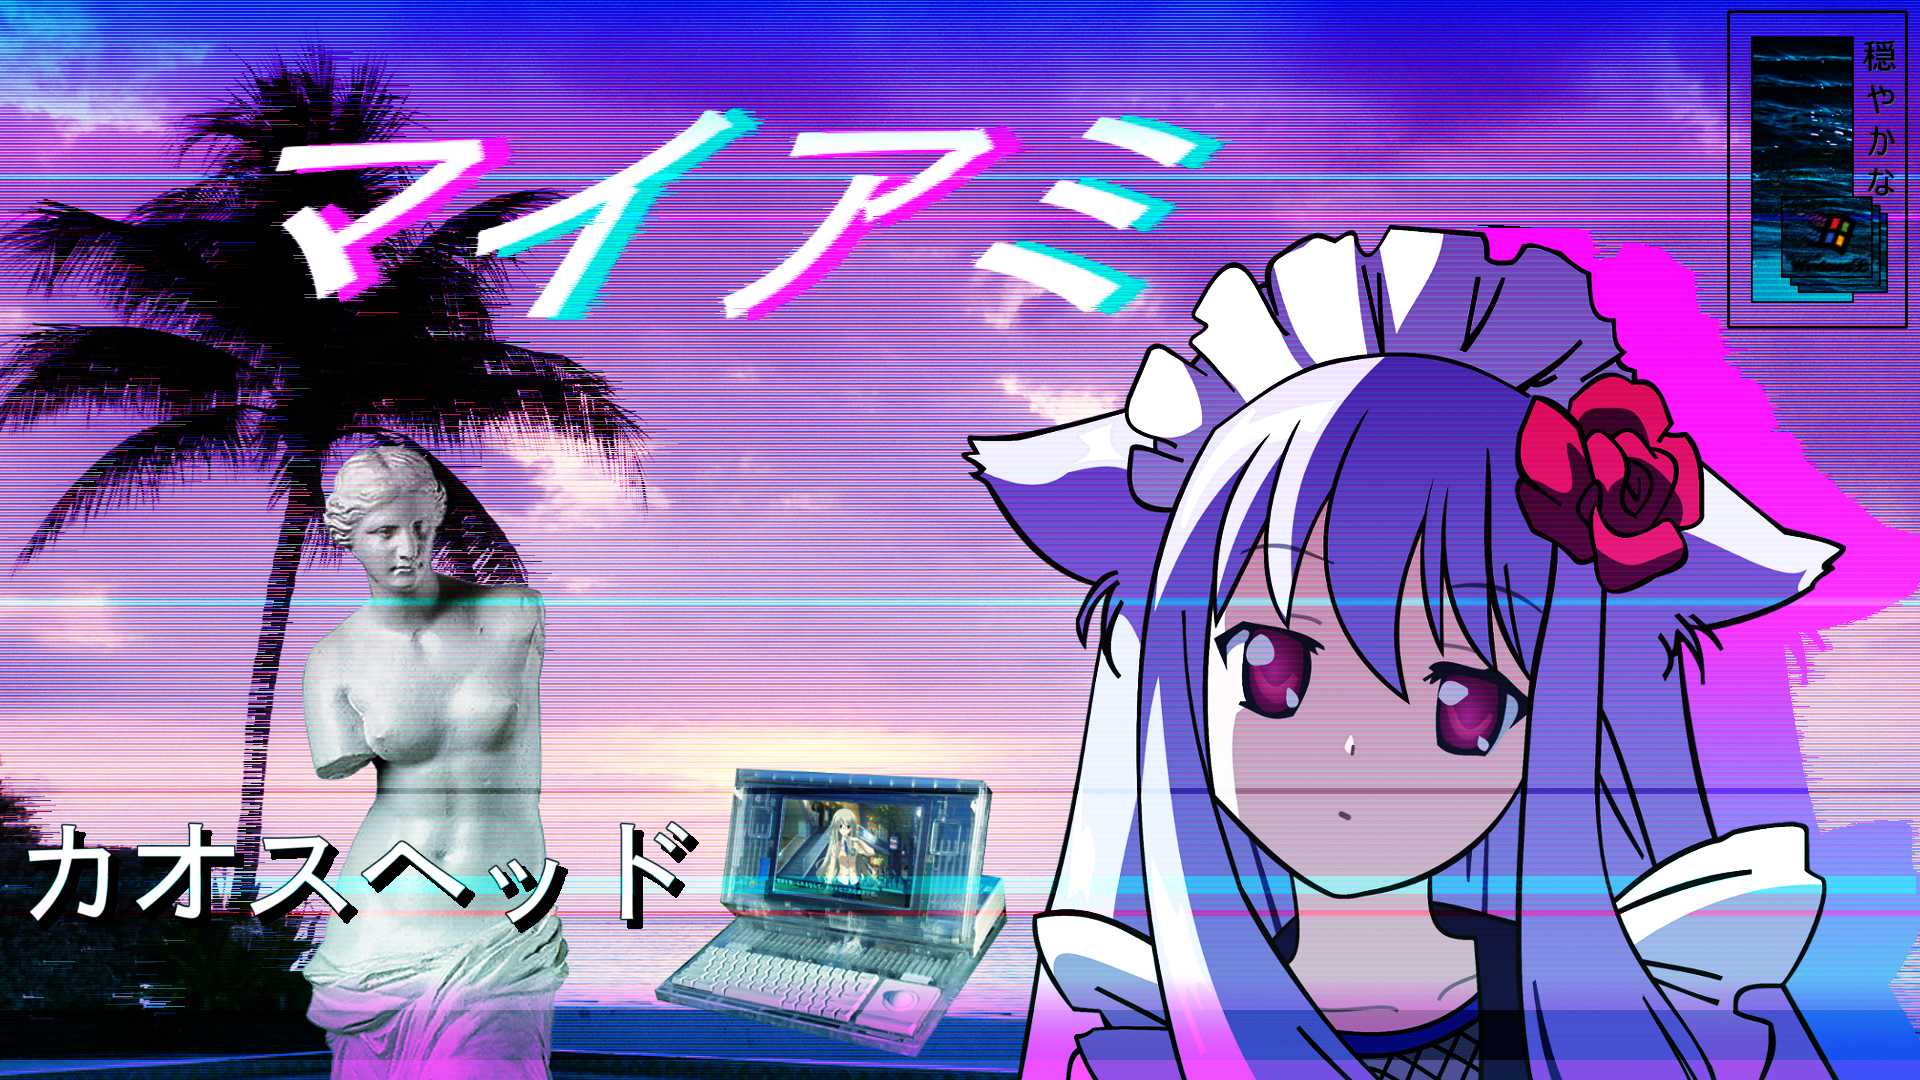 My Anime Vaporwave Wallpaper #04 by iamthebest052 on ...